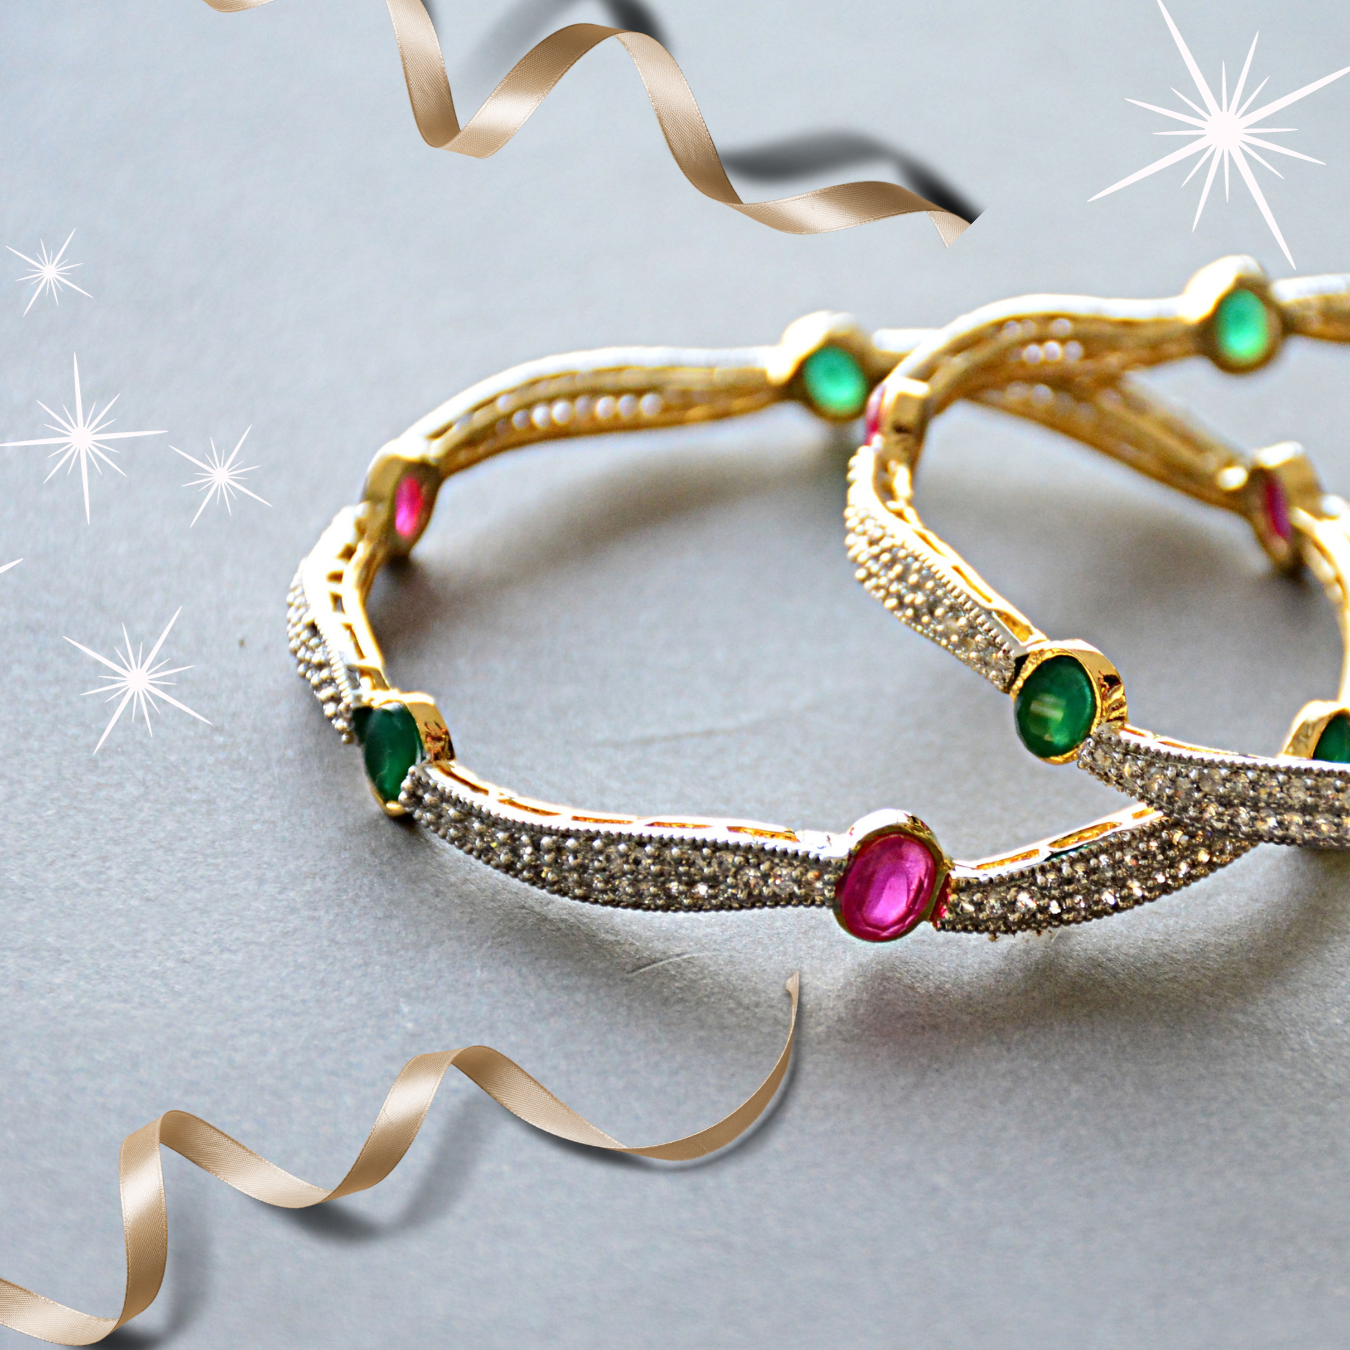 Festive bangles with pink and green jewels